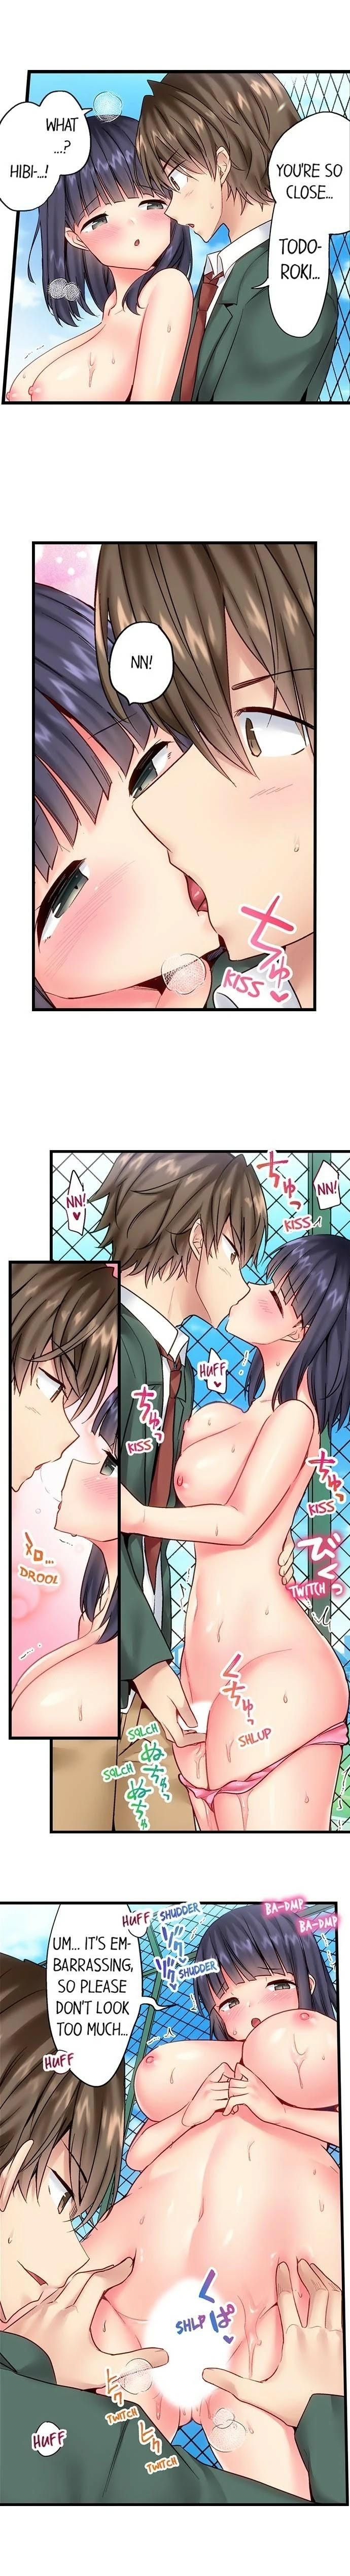 [Yuuki HB] "Hypnotized" Sex with My Brother Ch.21/? [English] [Ongoing] 125